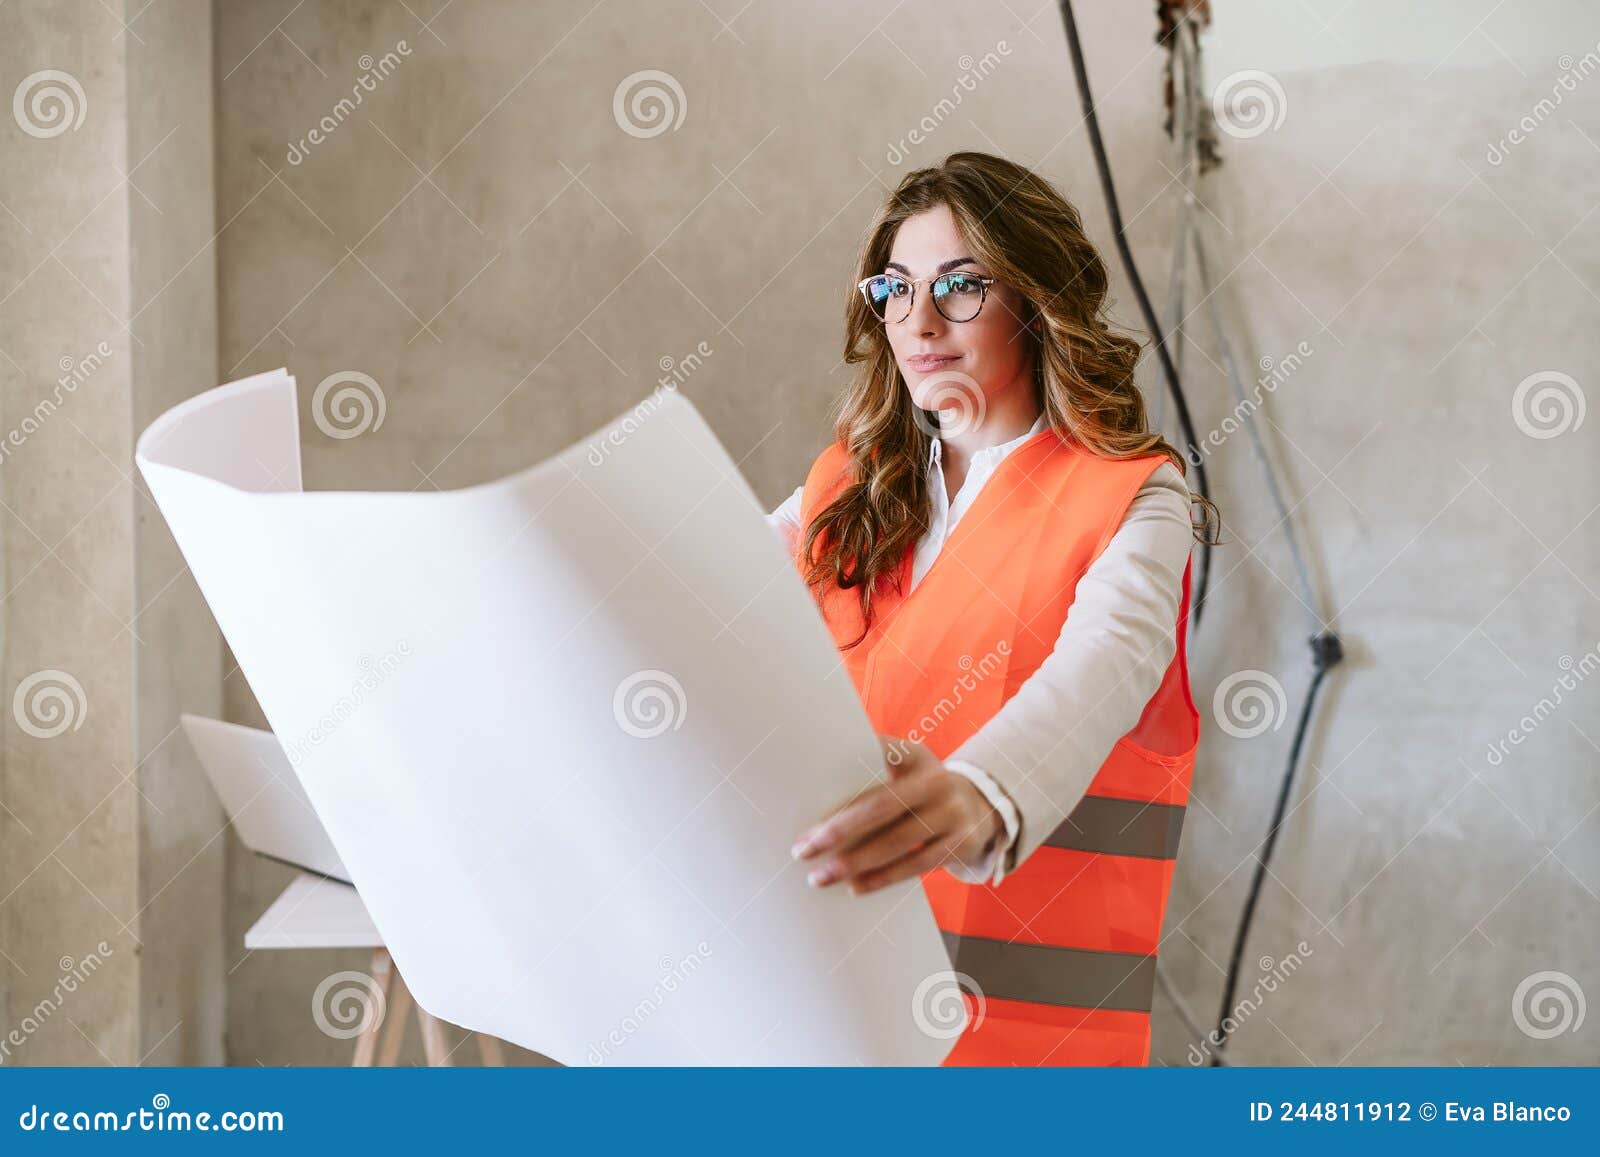 Professional Confident Architect Woman In Construction Site Holding Blueprints Home Renovation